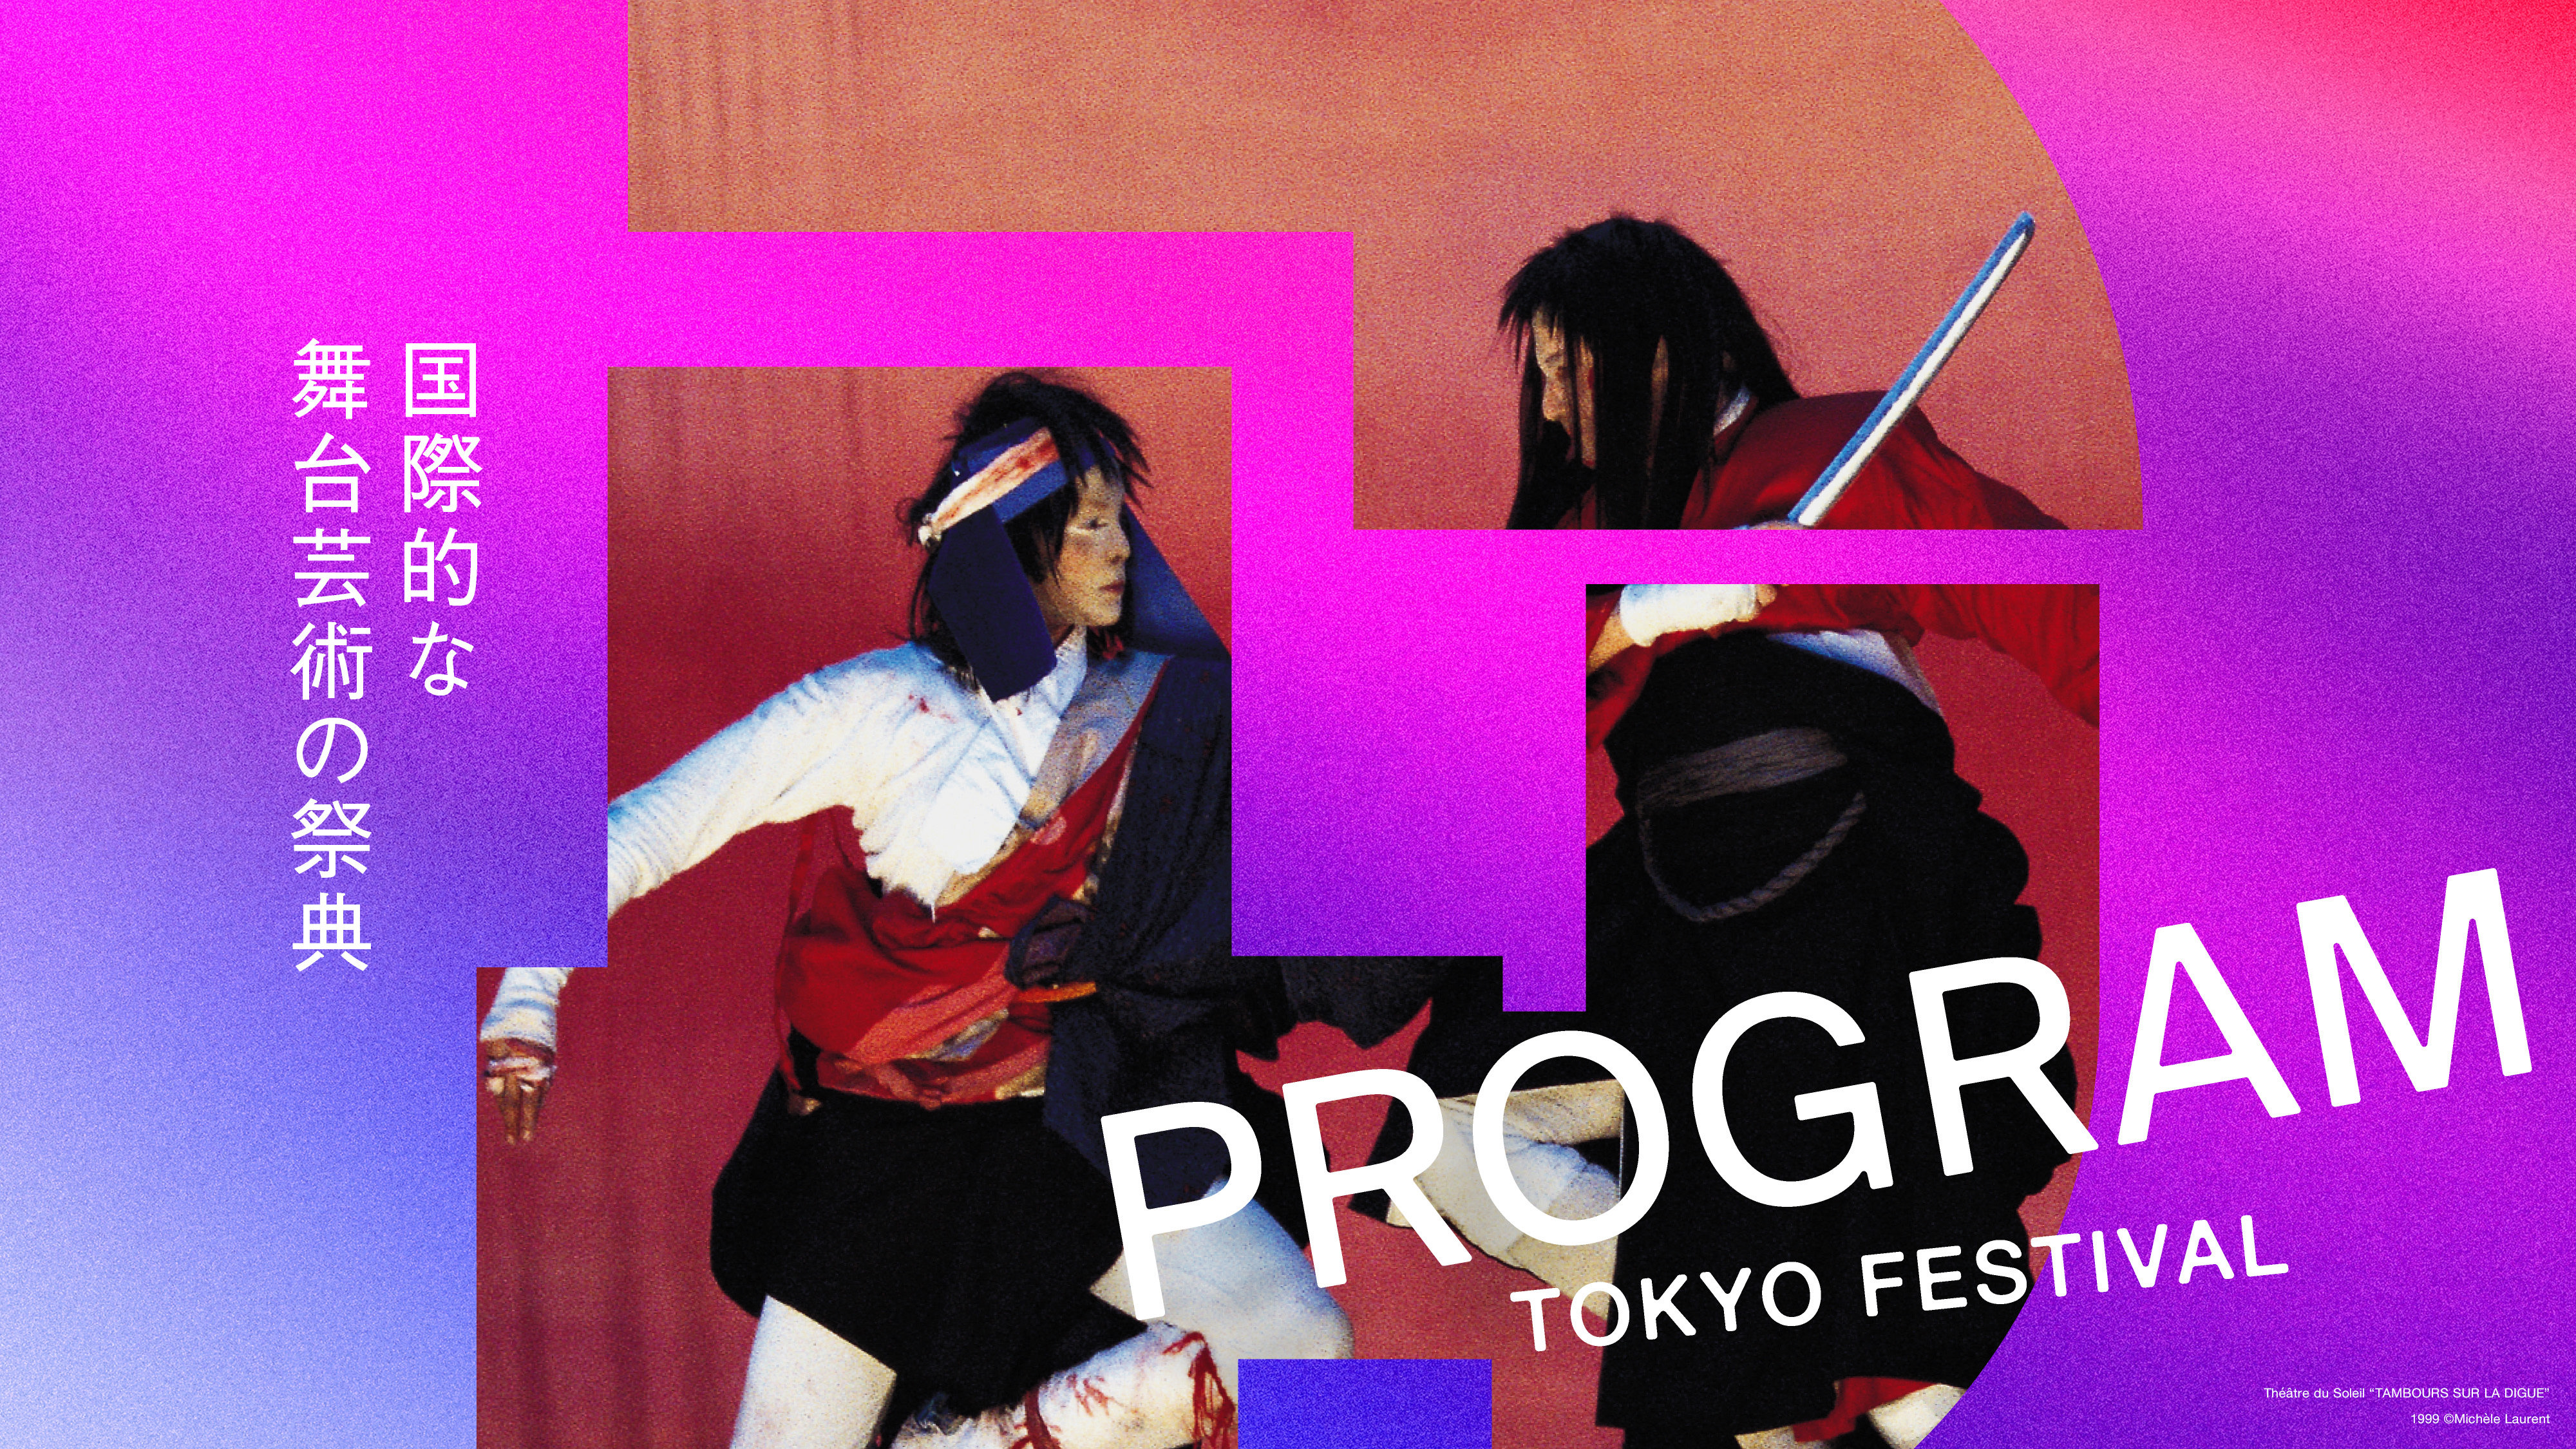 TOKYO FESTIVAL PROGRAM This year’s program See the artwork, join the events